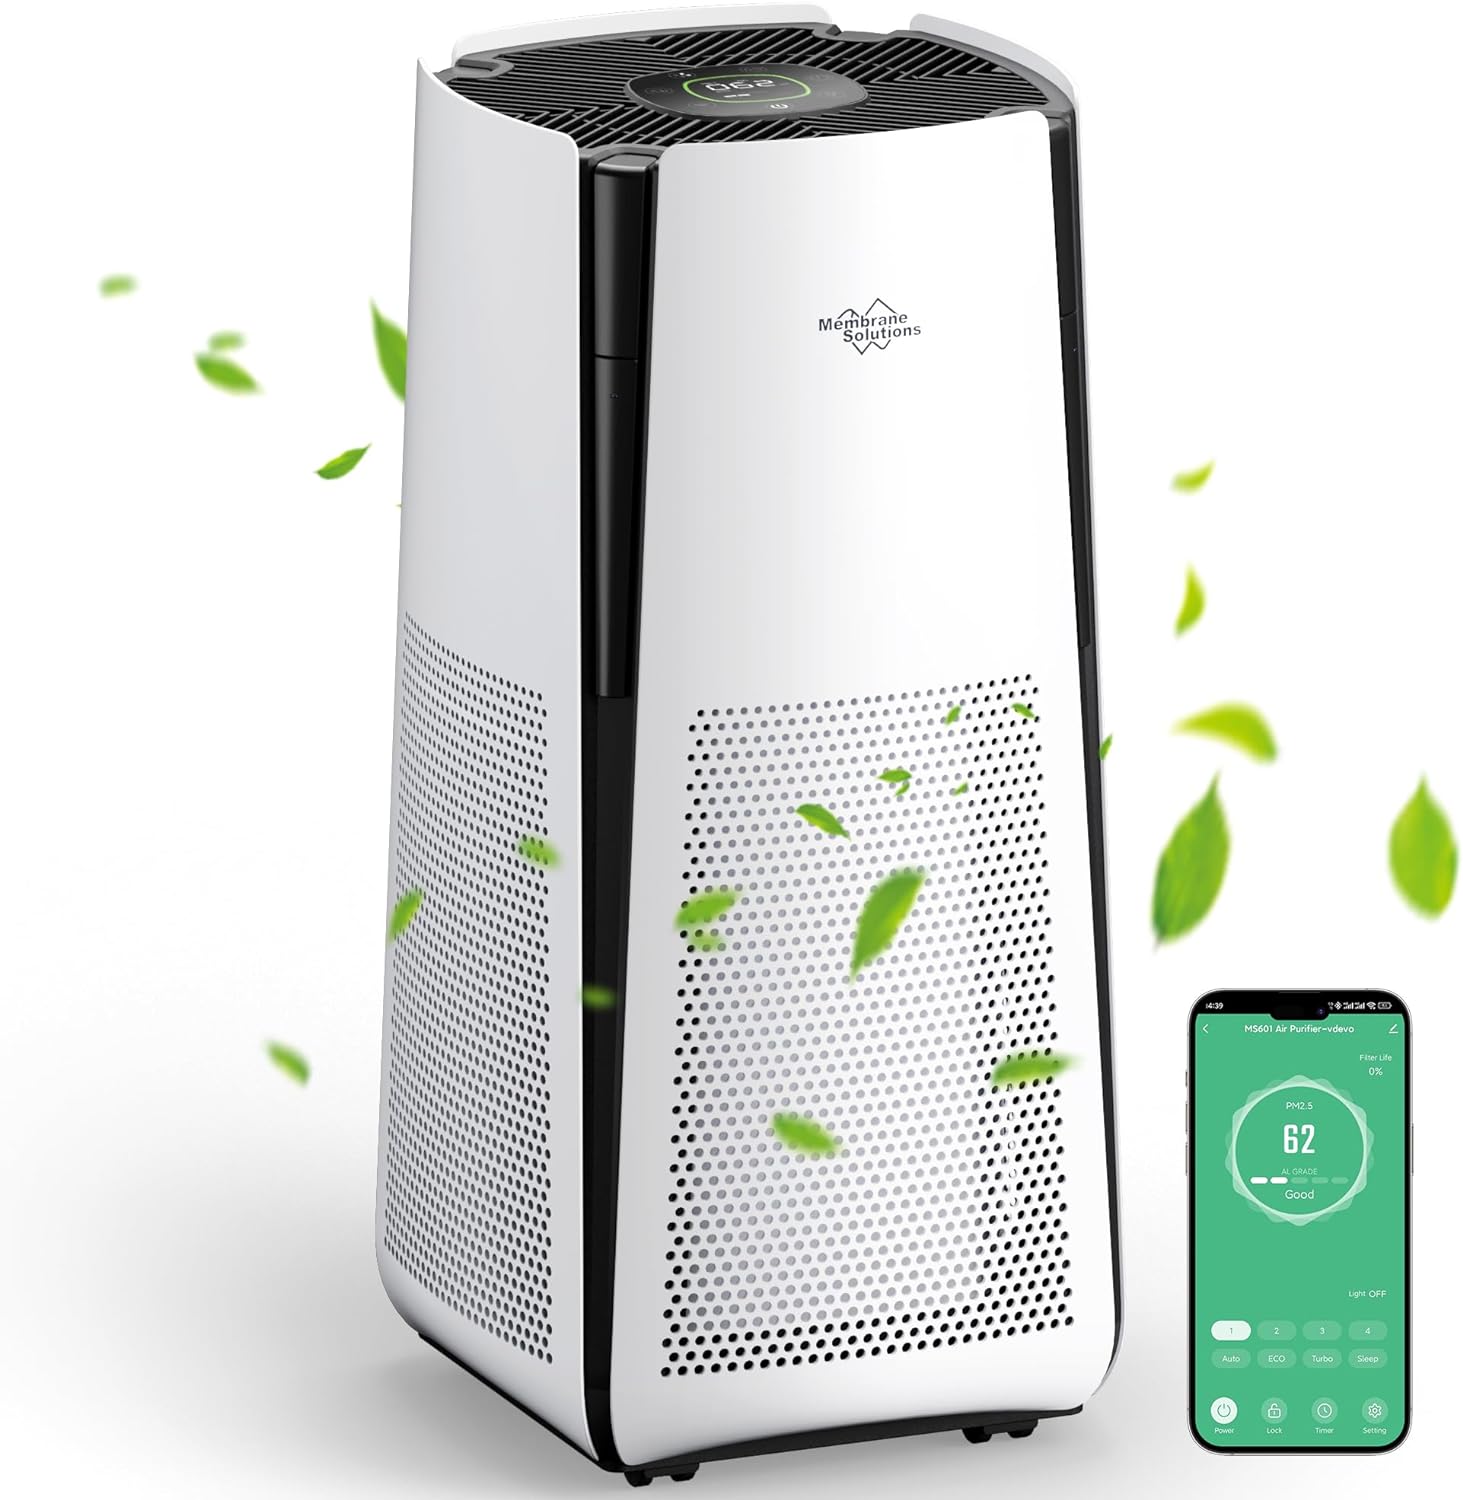 MS601 Smart Air Purifier for Extra Large Room up to 3027 Sq Ft | H13 True HEPA Air Purifier for Pets Auto & Eco Mode with PM2.5 Sensor